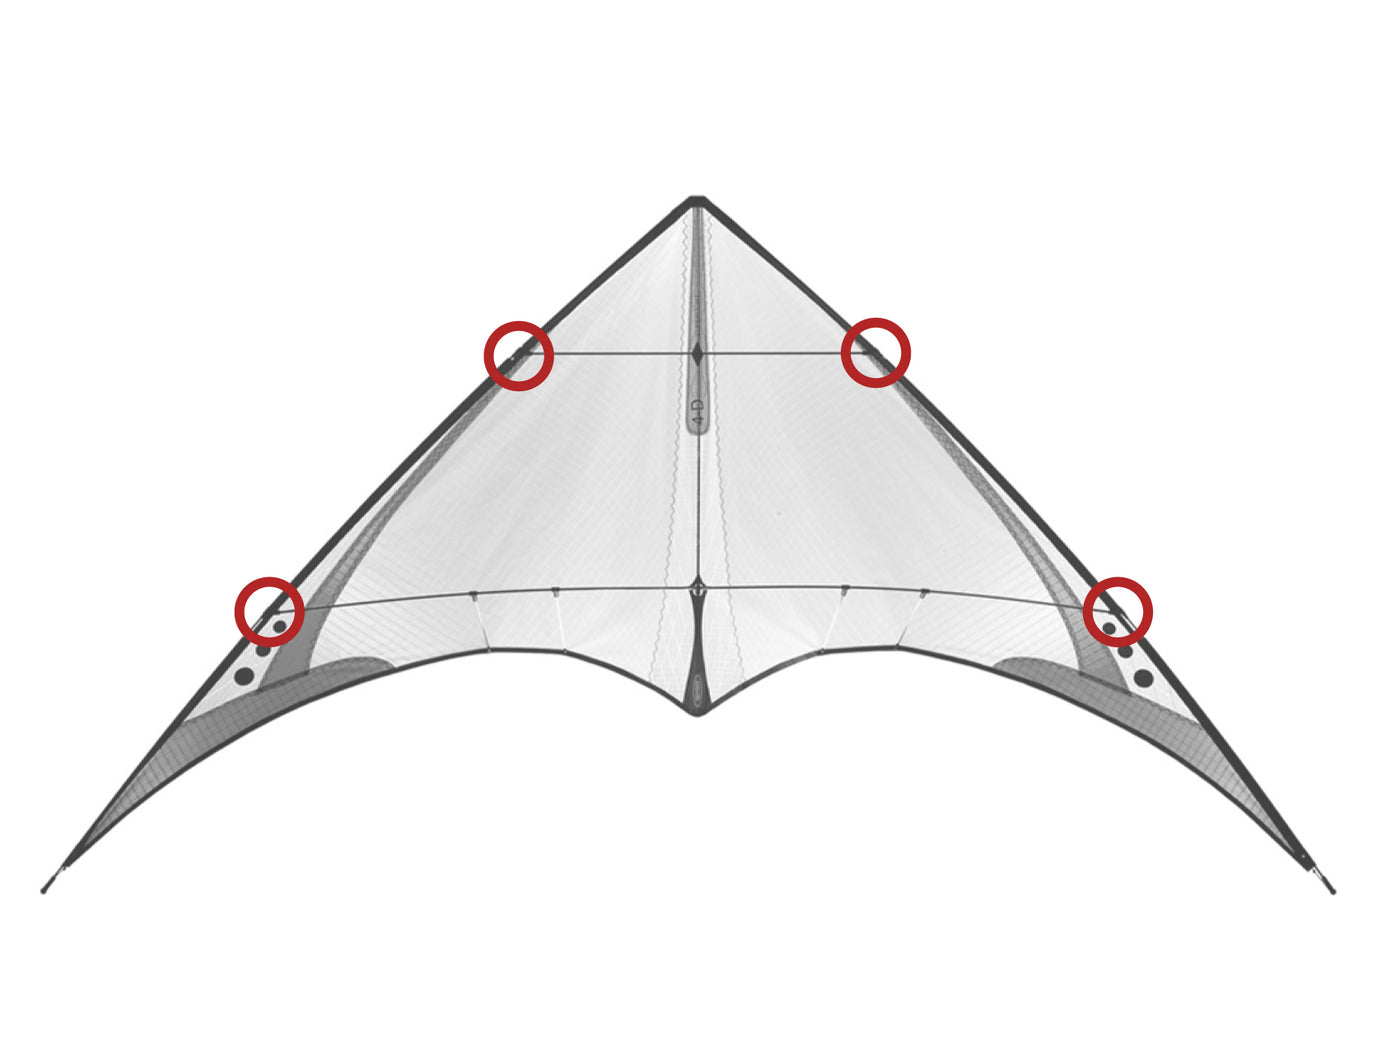 Diagram showing location of the 4-D Leading Edge Fittings (set of 4) on the kite.